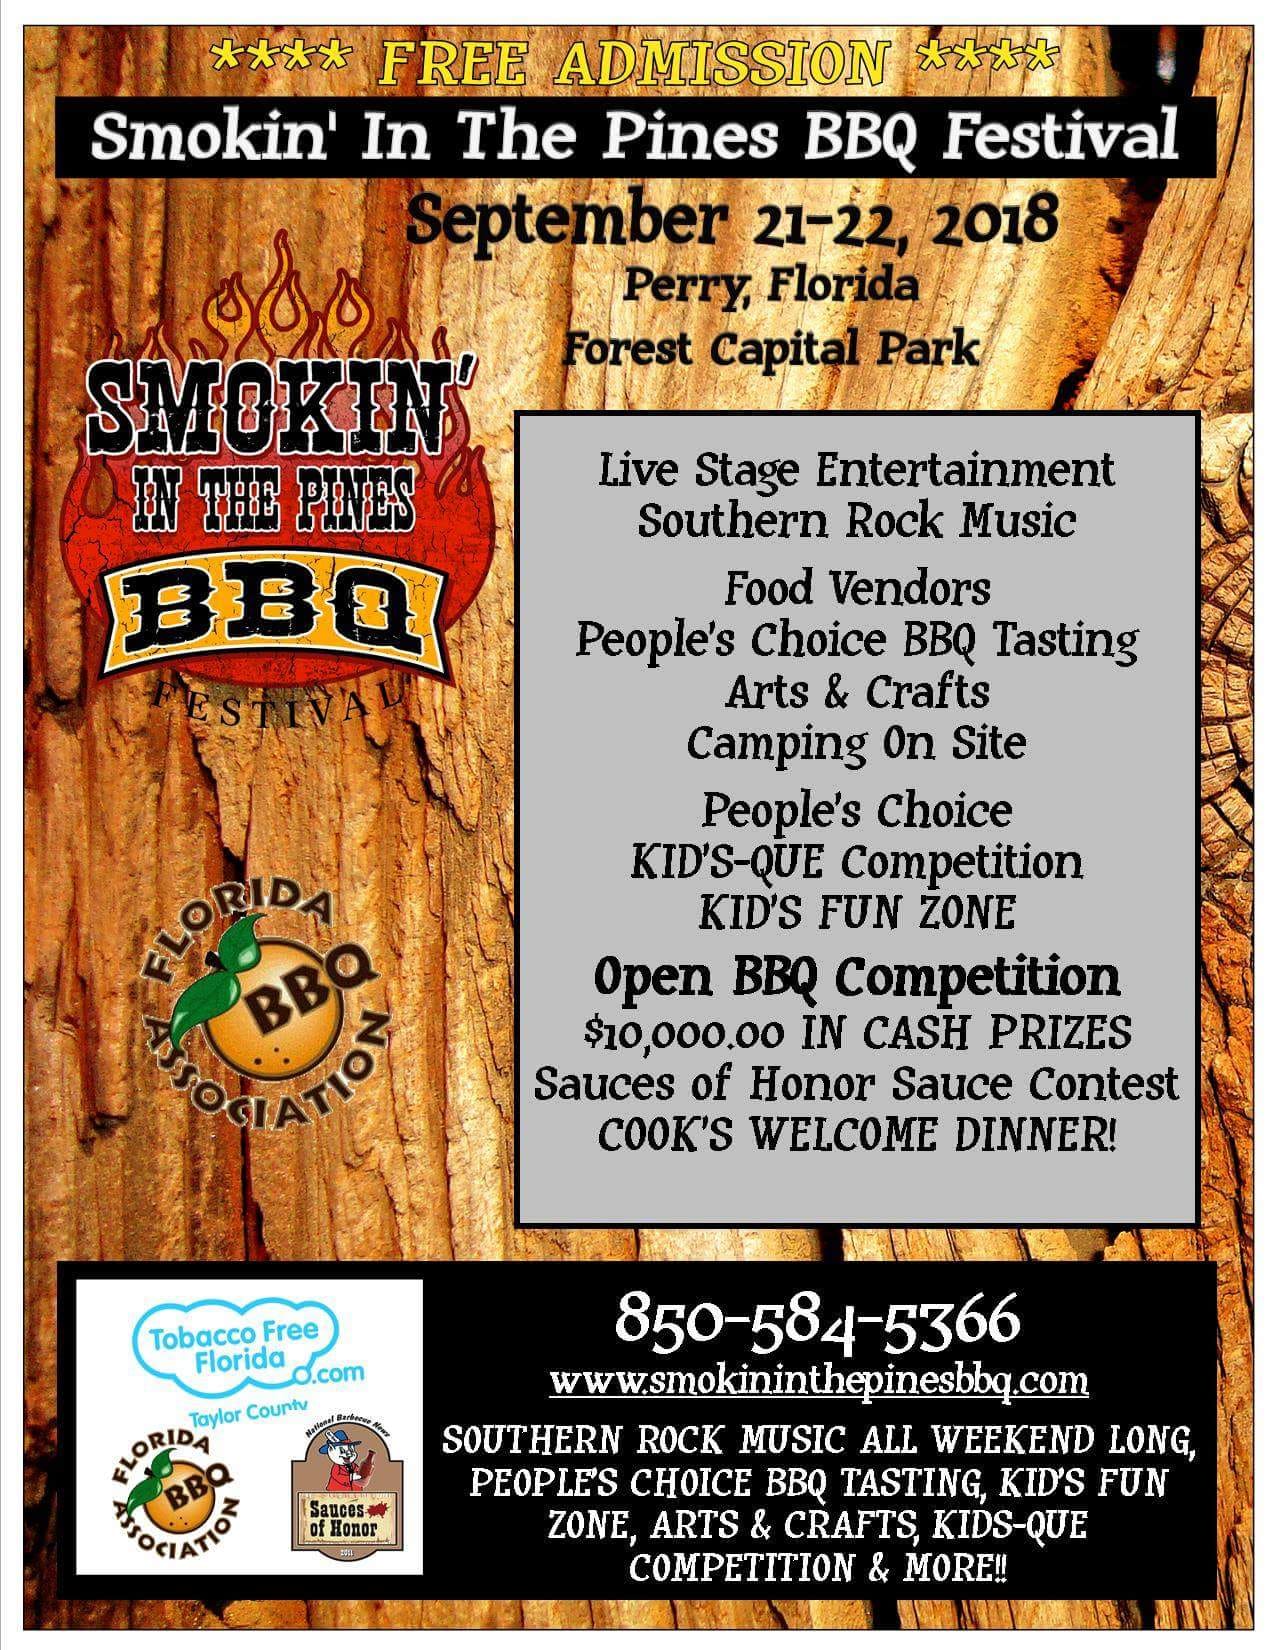 Smokin' In The Pines BBQ Festival